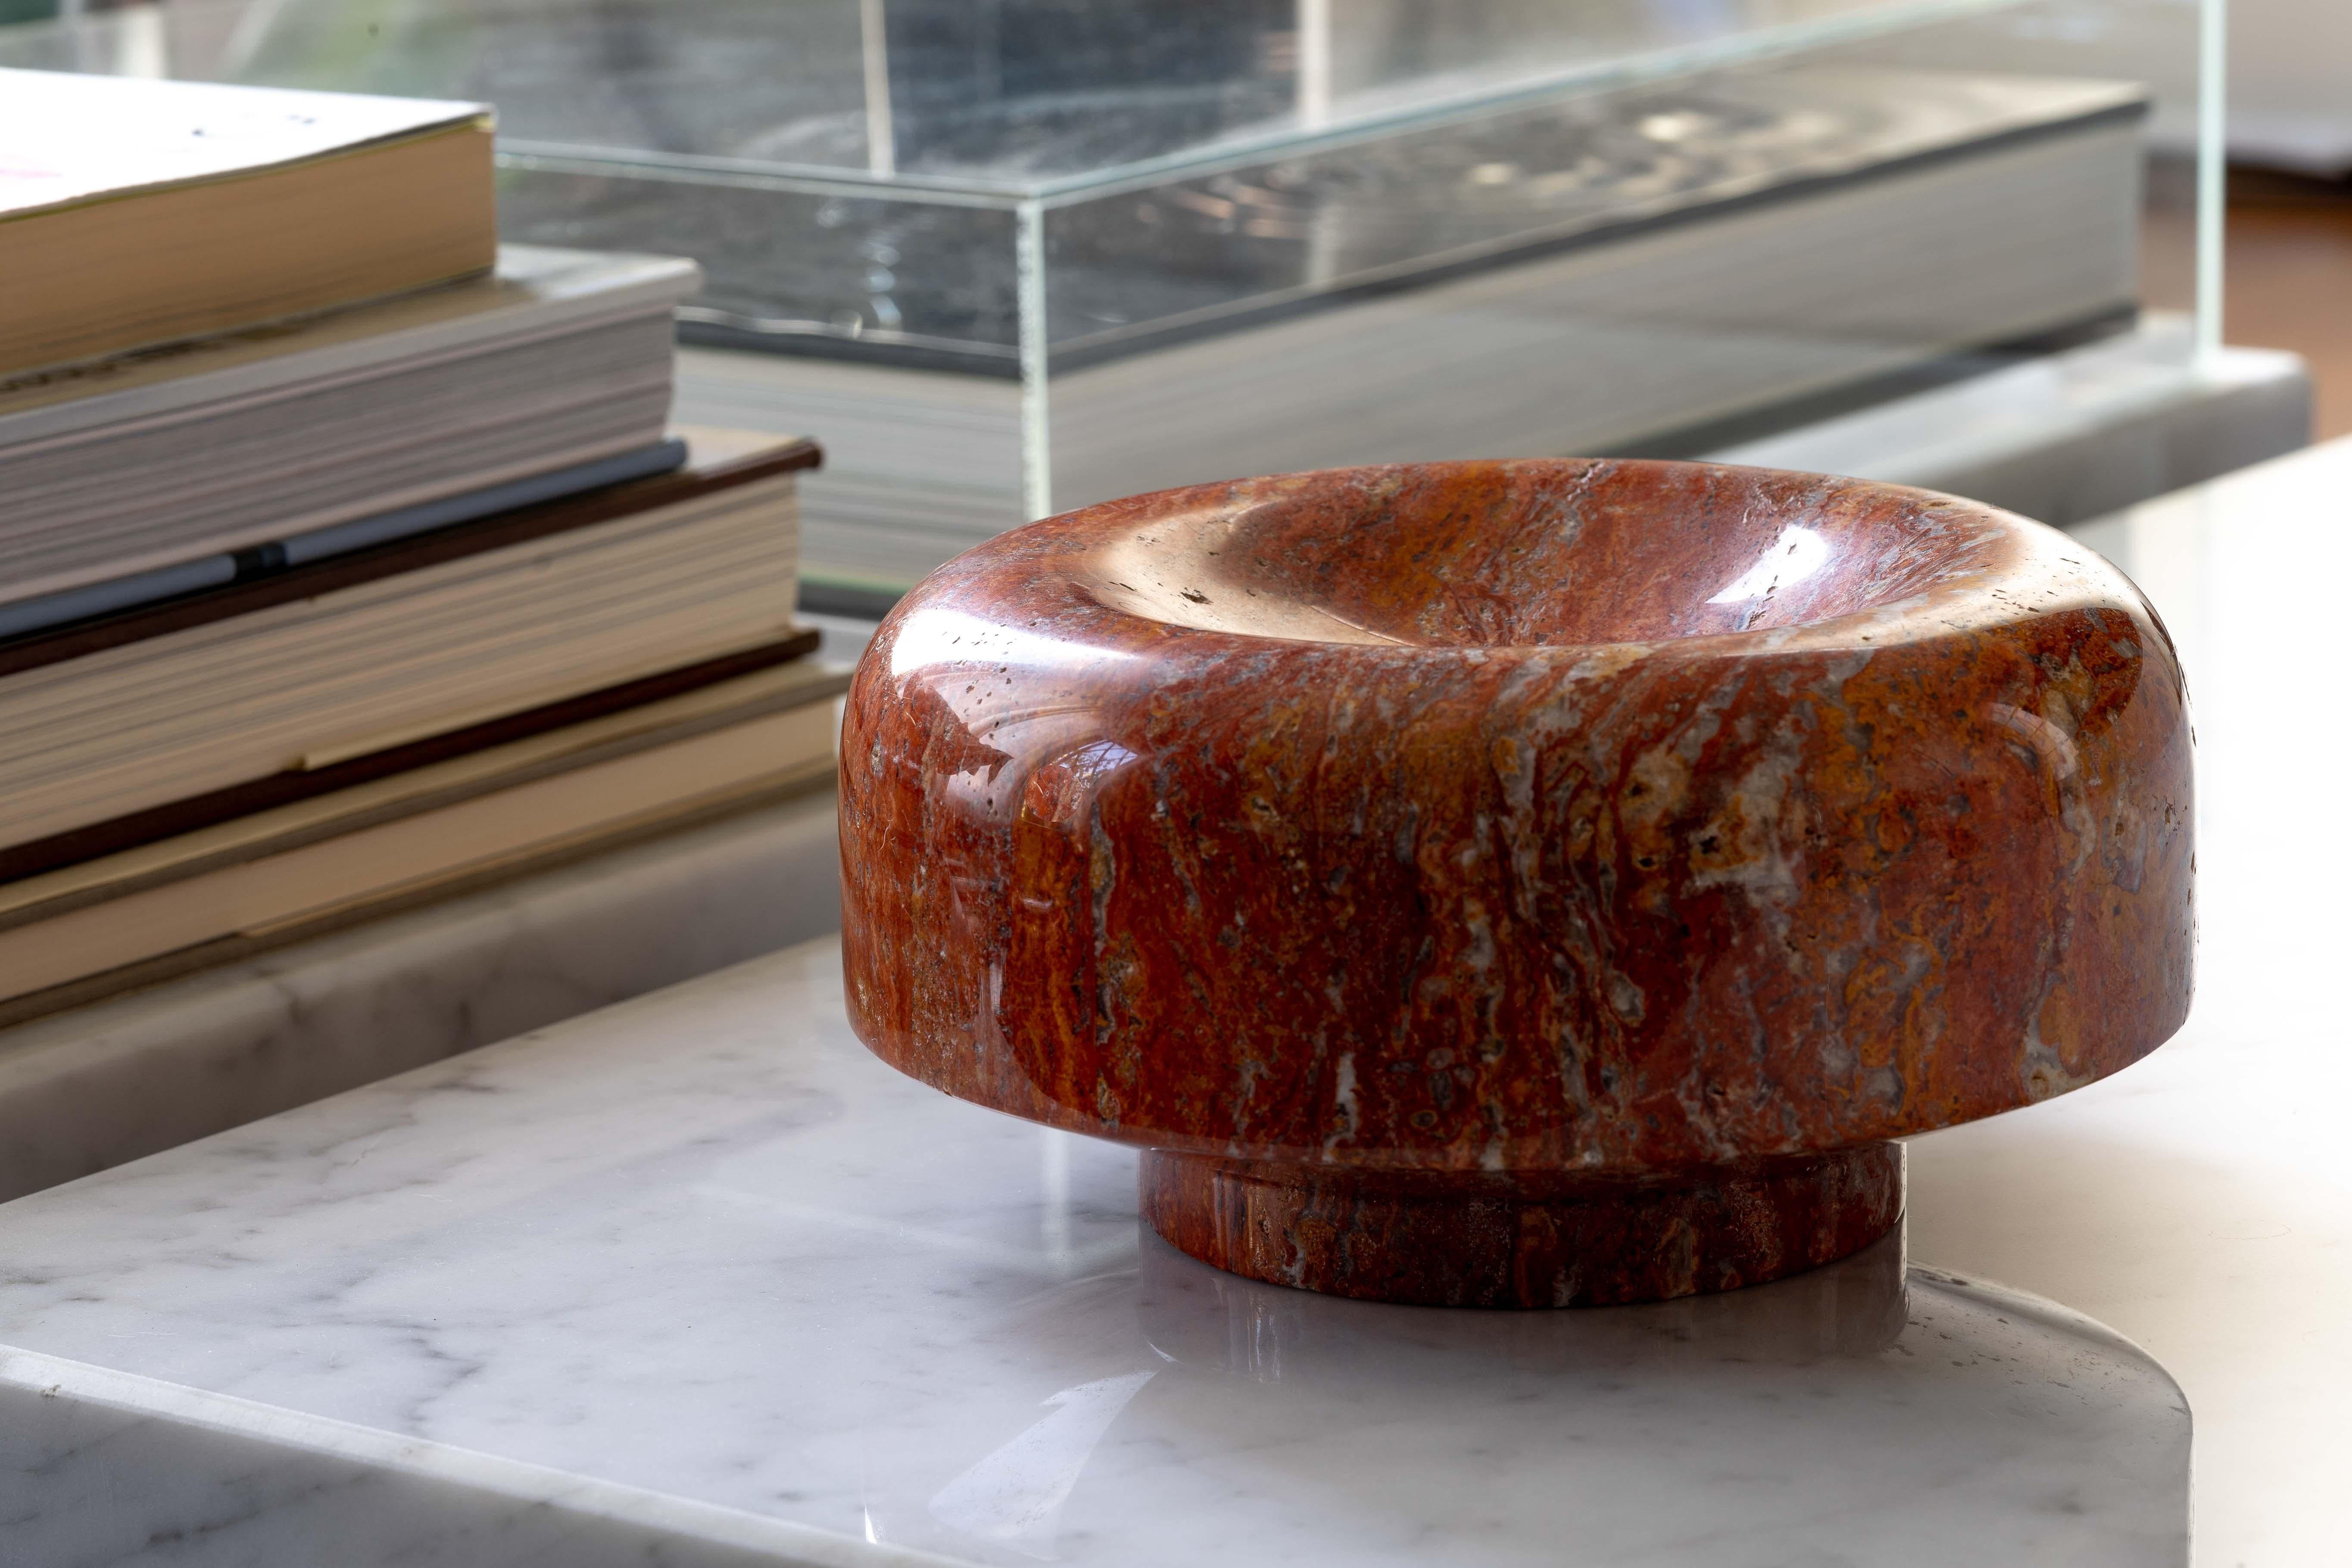 A striking marble centerpiece designed by Roberto Arioli for Gabbianelli in 1969. Expertly carved from a single block of reddish-orange marble, the centerpiece has a shallow concave recess on the top, with sides that angle down and under to create a